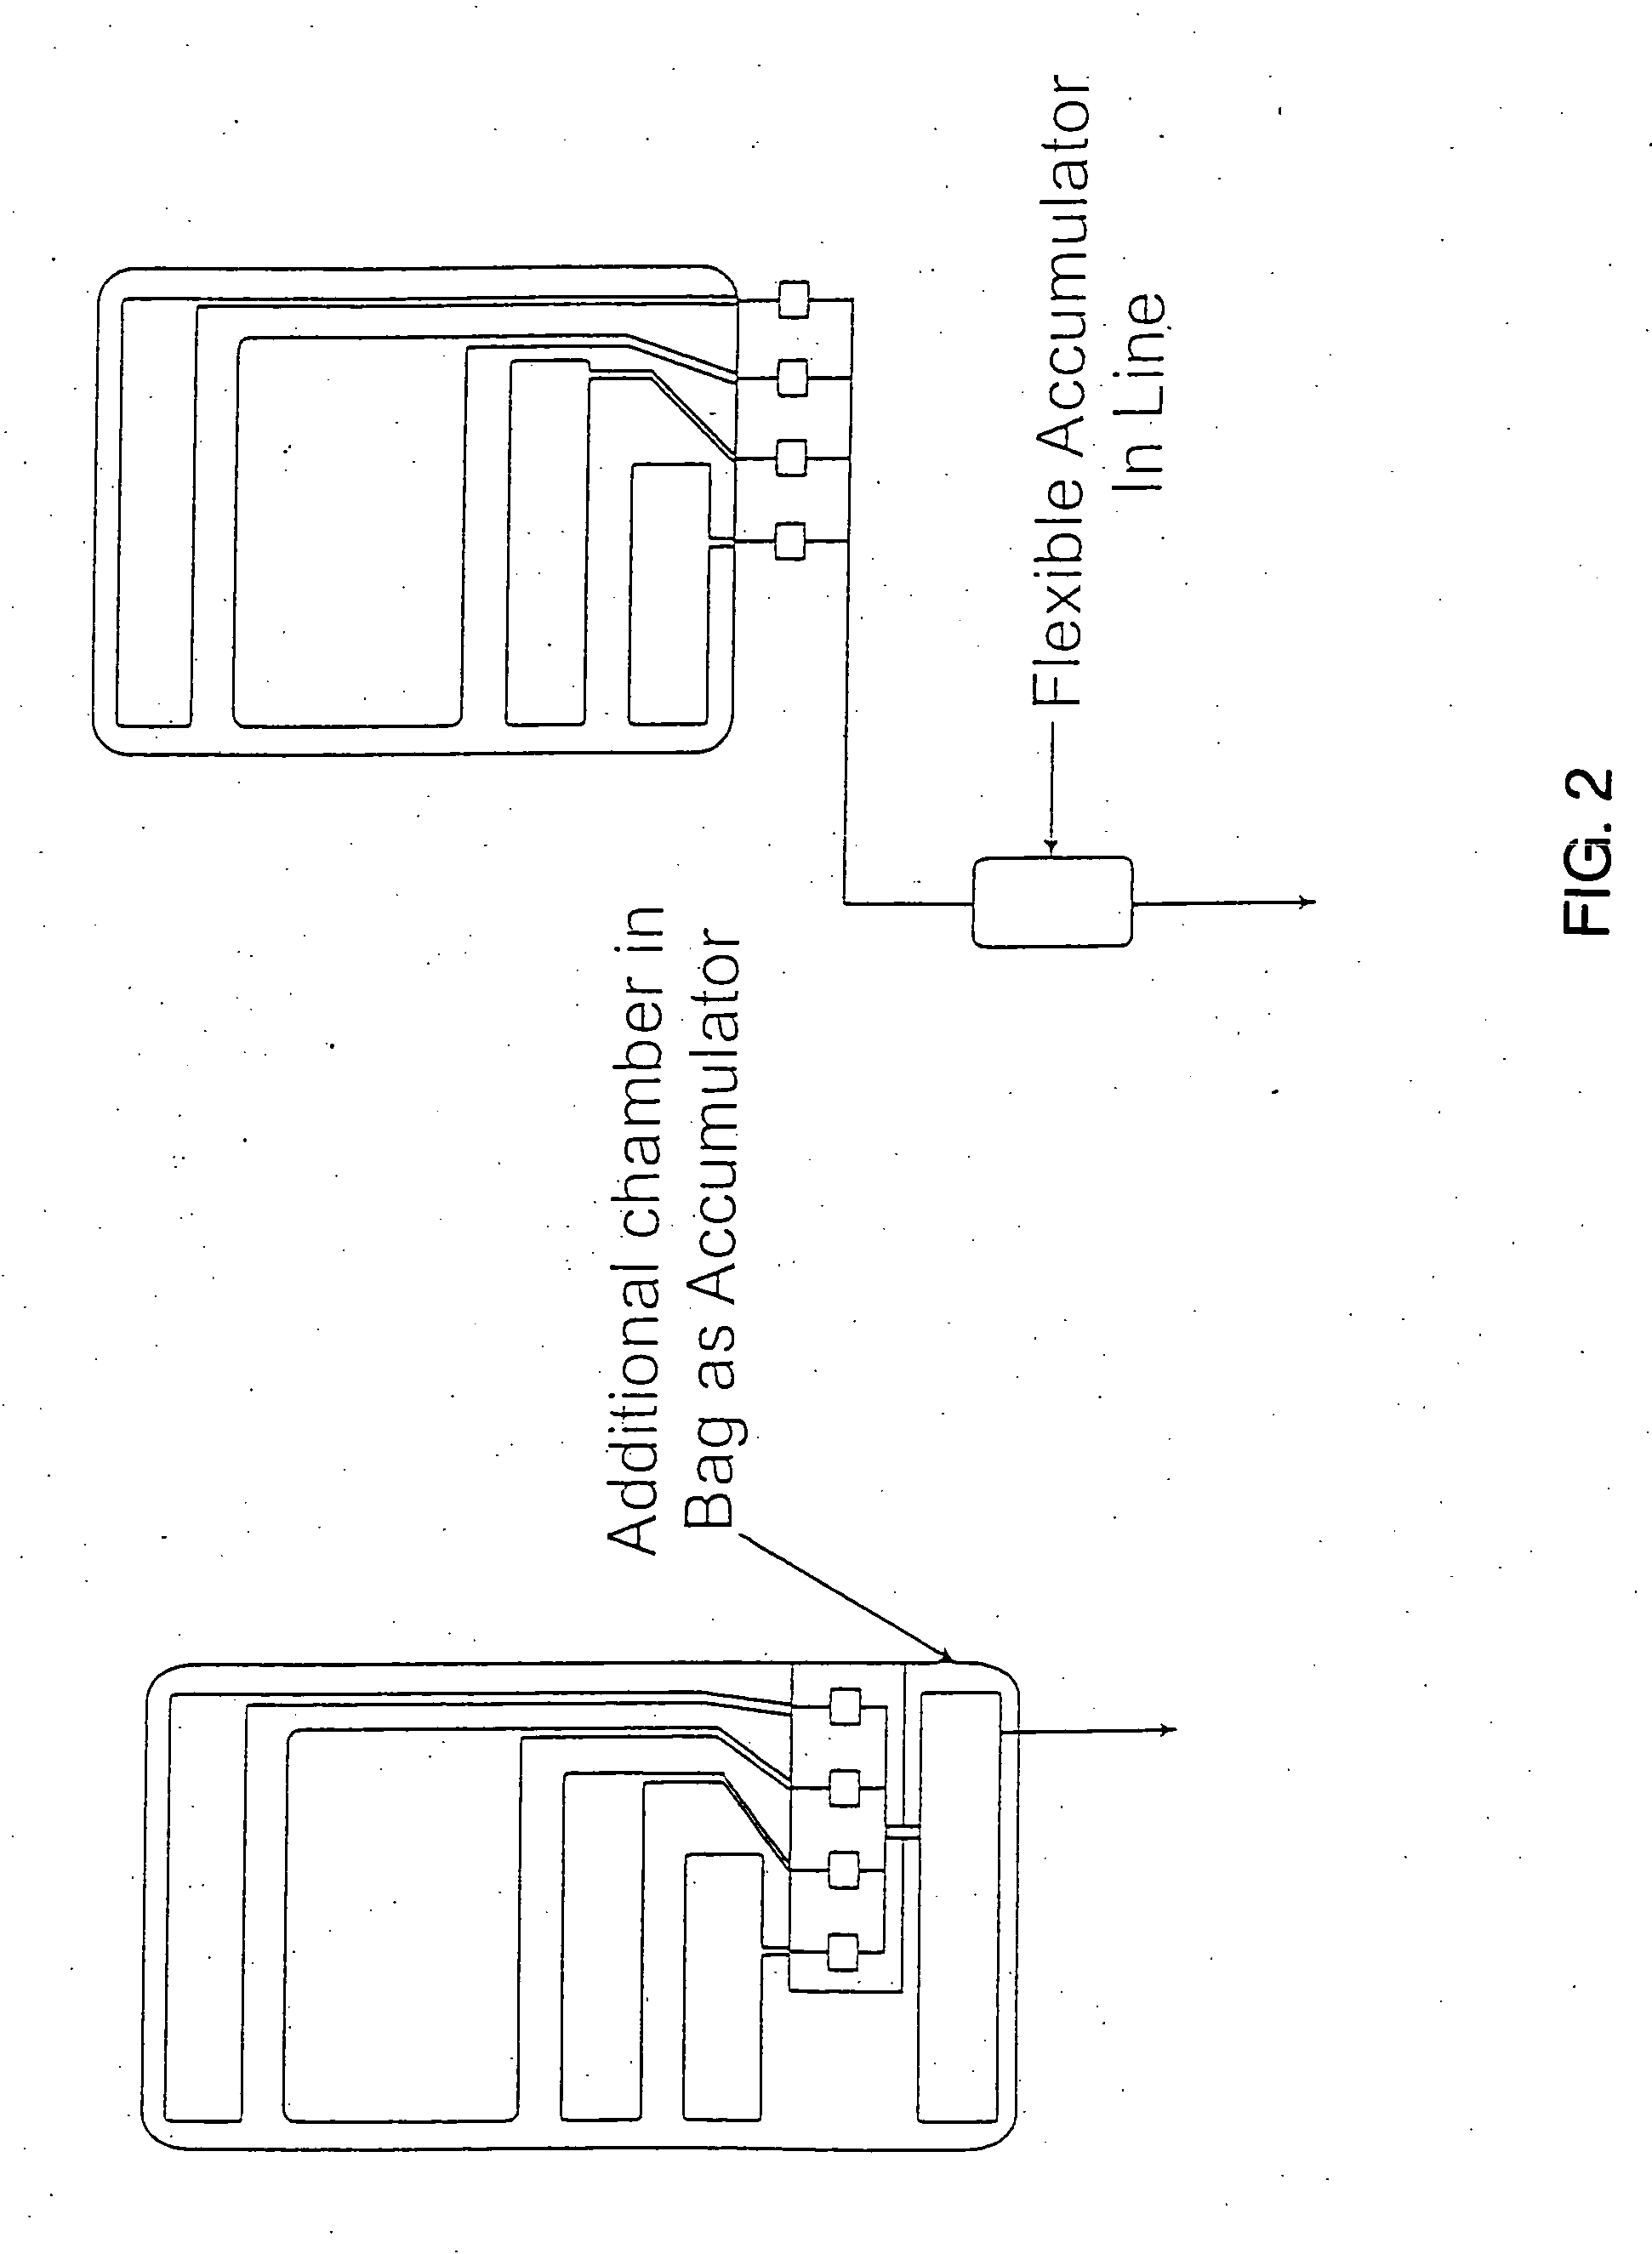 Medication delivery apparatus and methods for intravenous infusions